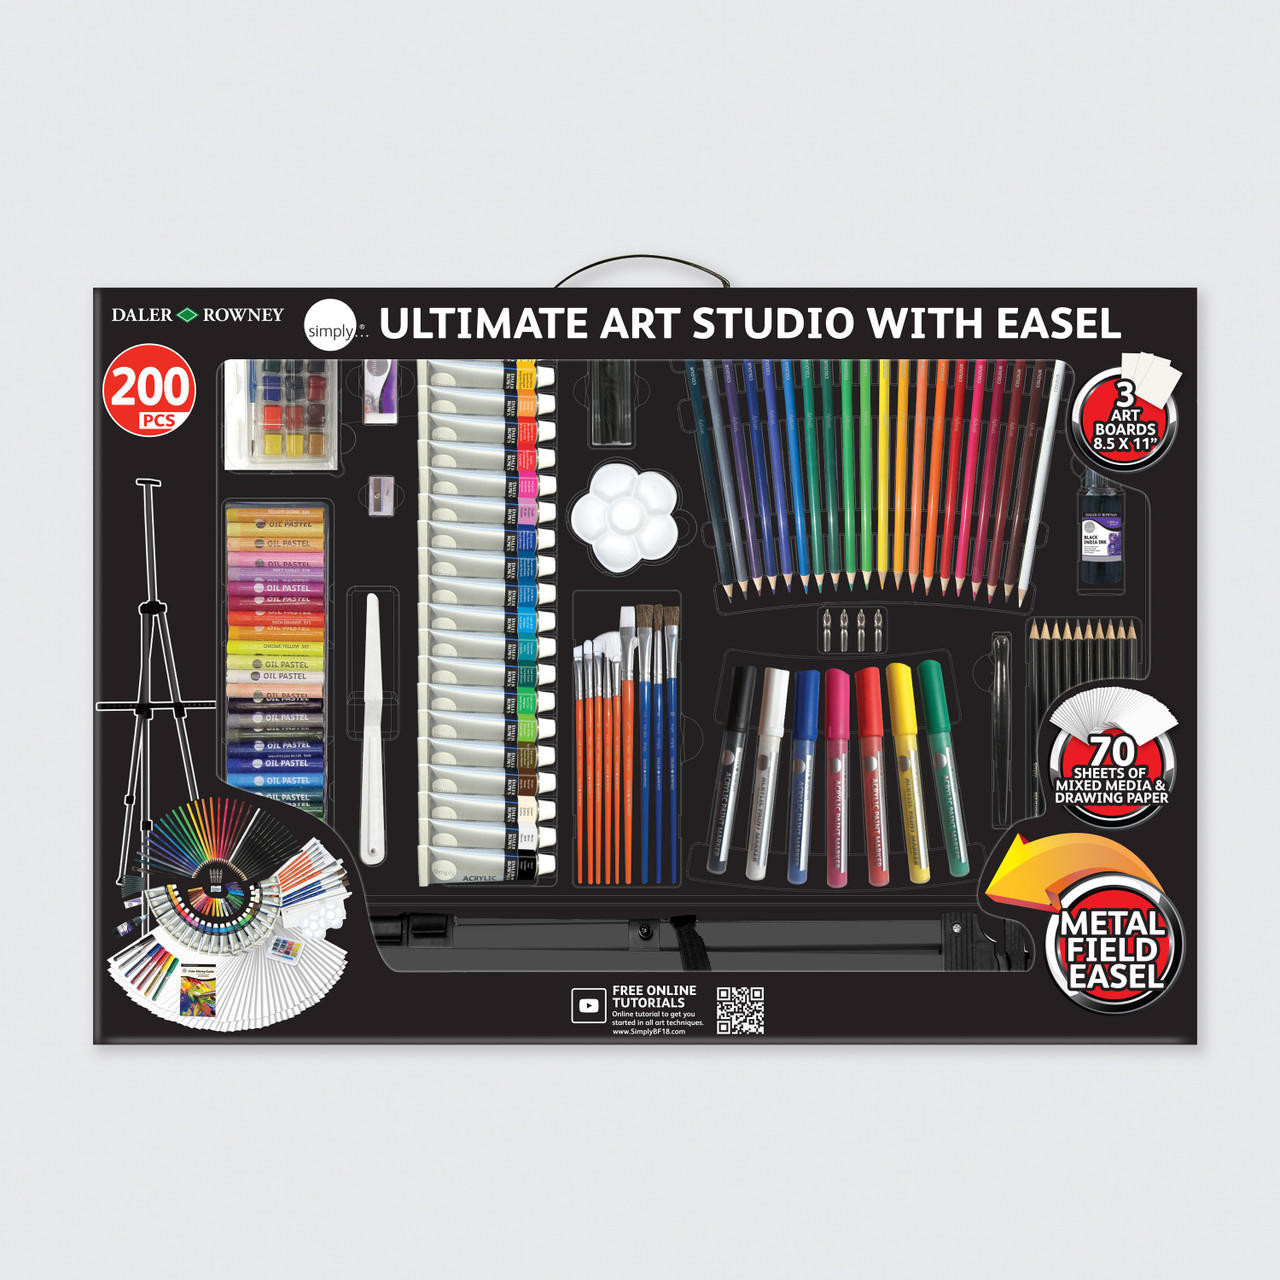 Daler Rowney Simply Ultimate Art Studio With Easel Assorted Set of